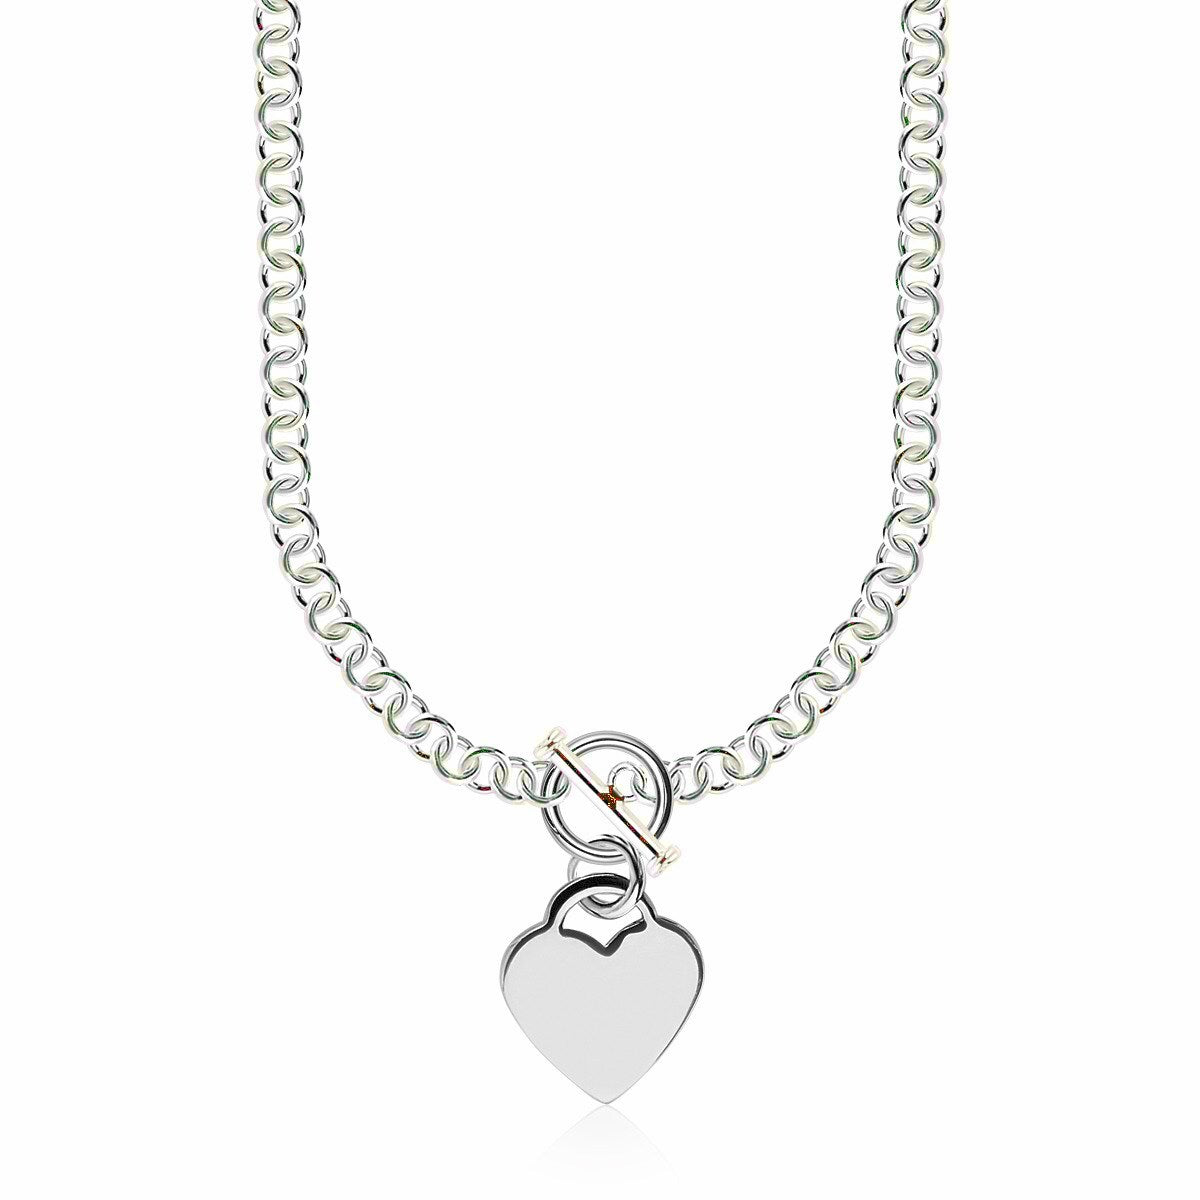 Sterling Silver Rhodium Plated Rolo Chain Necklace with a Heart Toggle Charm, size 16''